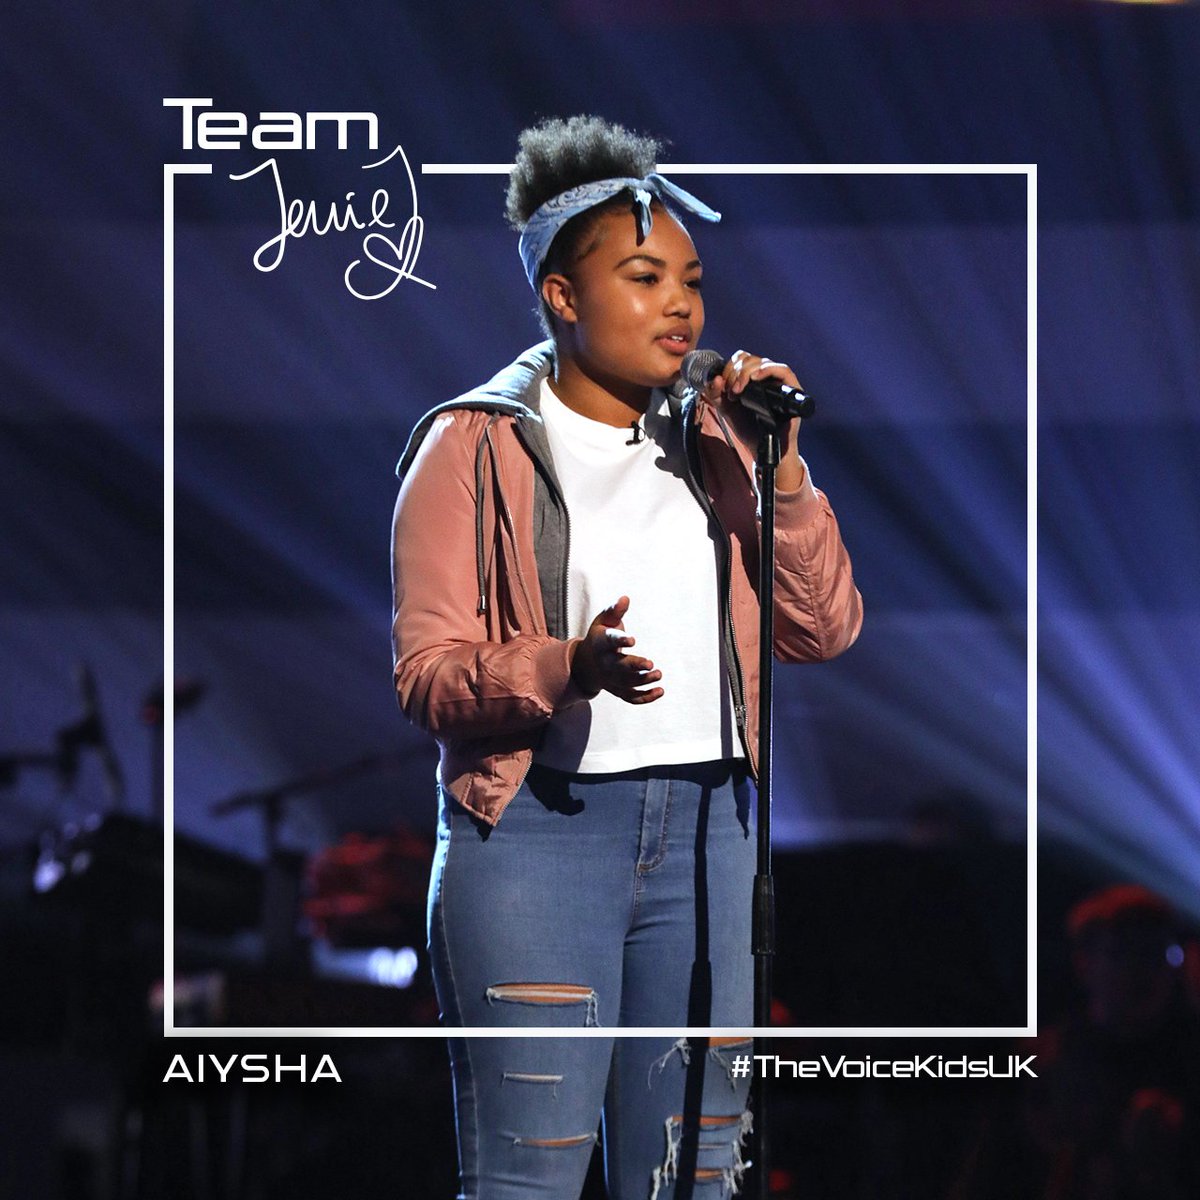 Yes! You're with me Aisha! <3 #TeamJessieJ The Voice Kids UK @thevoicekidsuk #itv https://t.co/ZTKypD8WR3